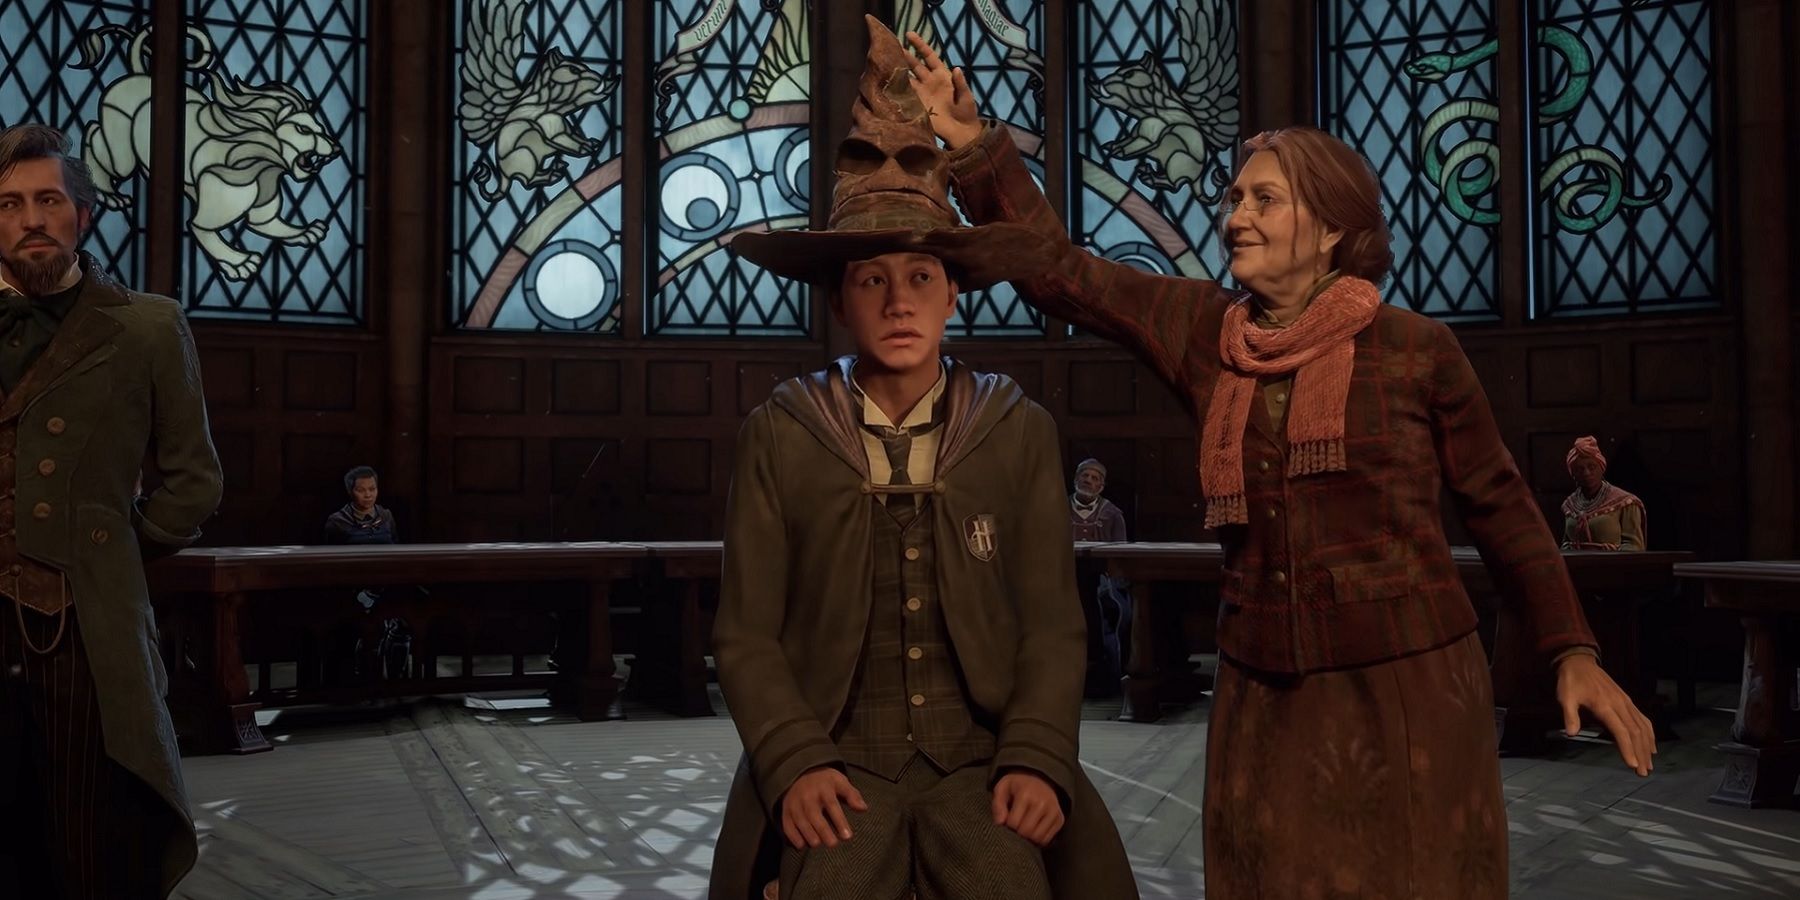 Here's Almost 45 Minutes Of Hogwarts Legacy Character Customisation,  Exploration And Combat